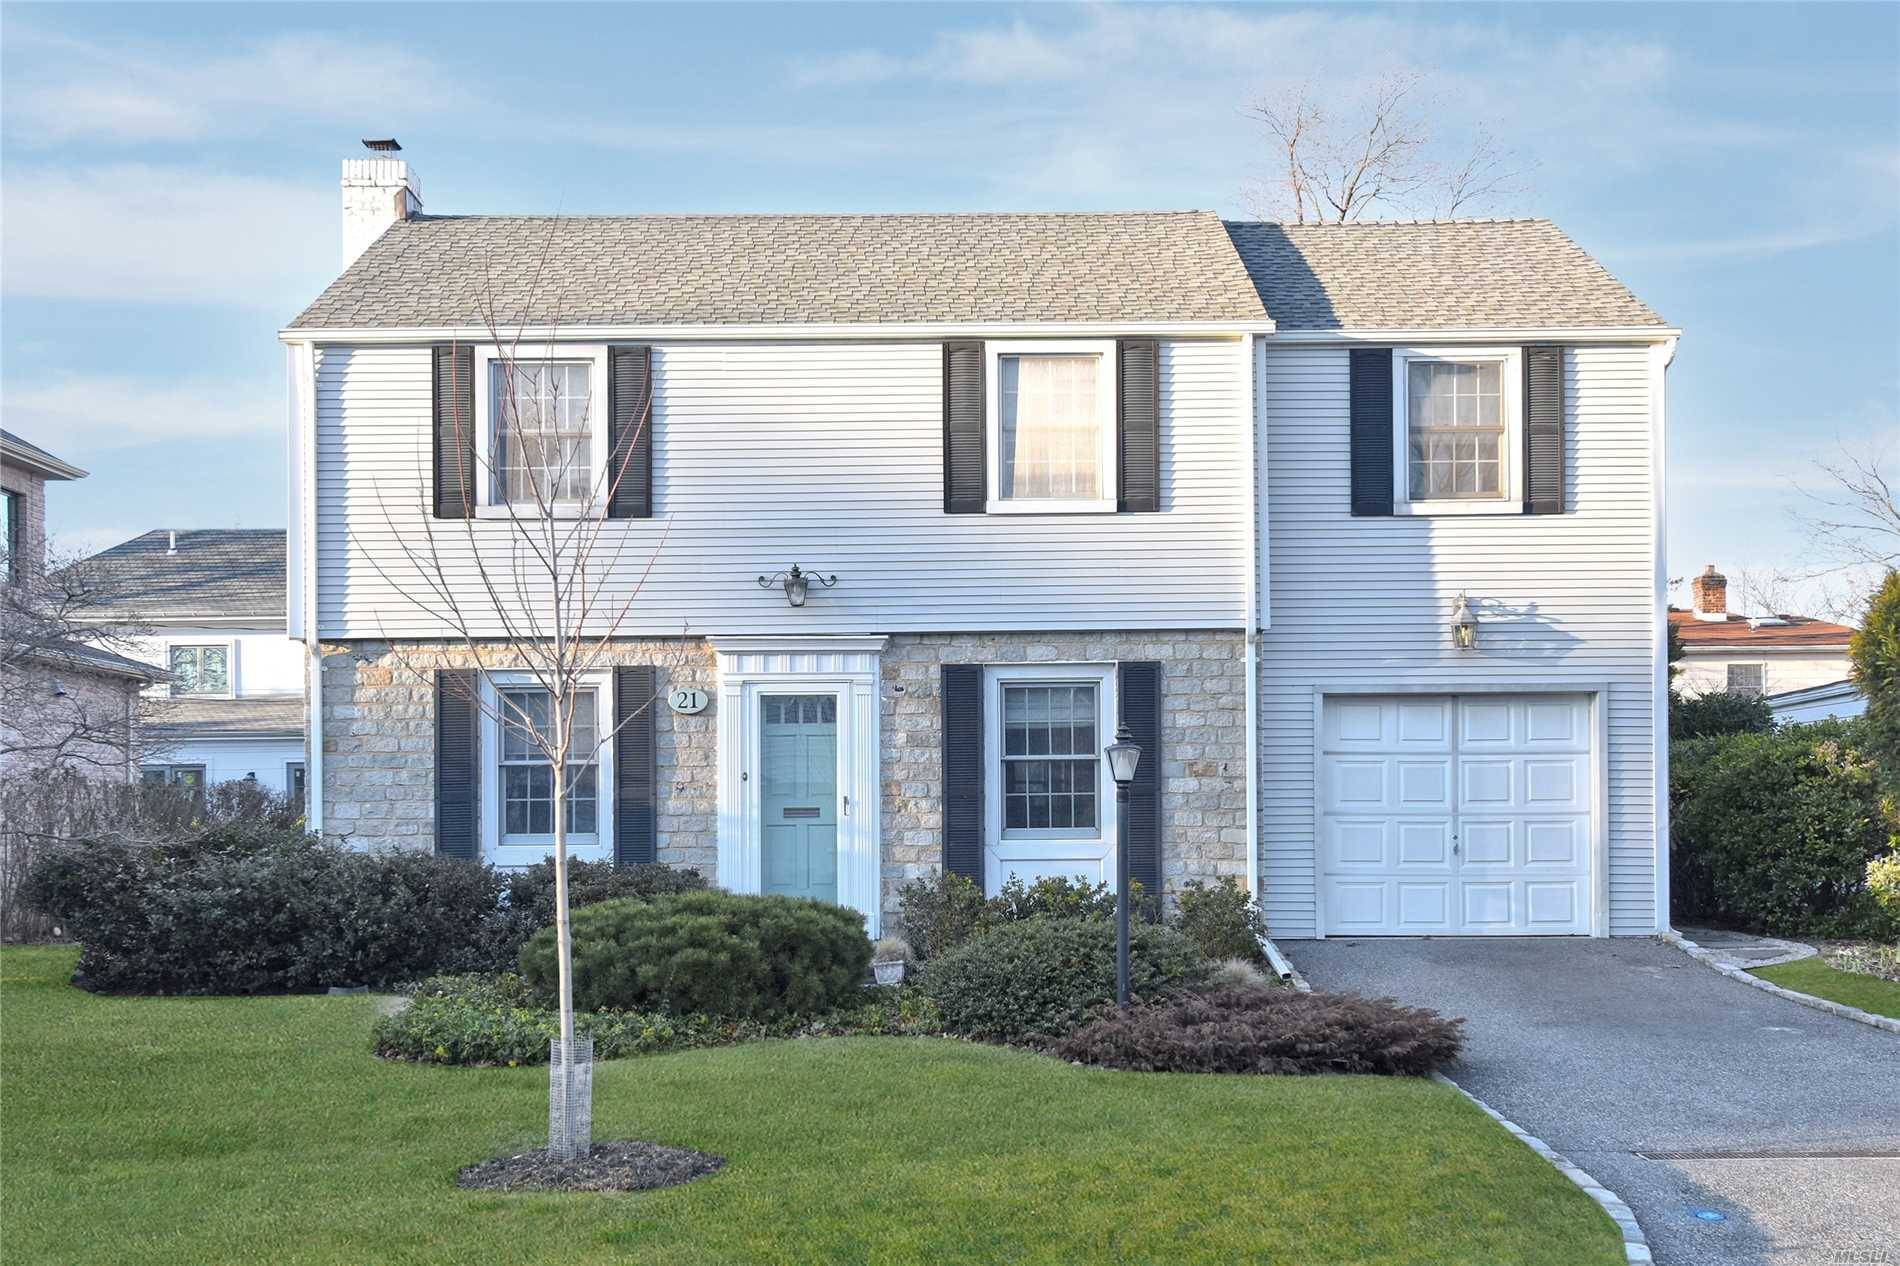 Traditional Center Hall Colonial, Ideal Mid Block Location, This Tucked Away Gem Is Situated On A Quiet Street, Conveniently Located To Schools, Parkwood Pool and Worship.